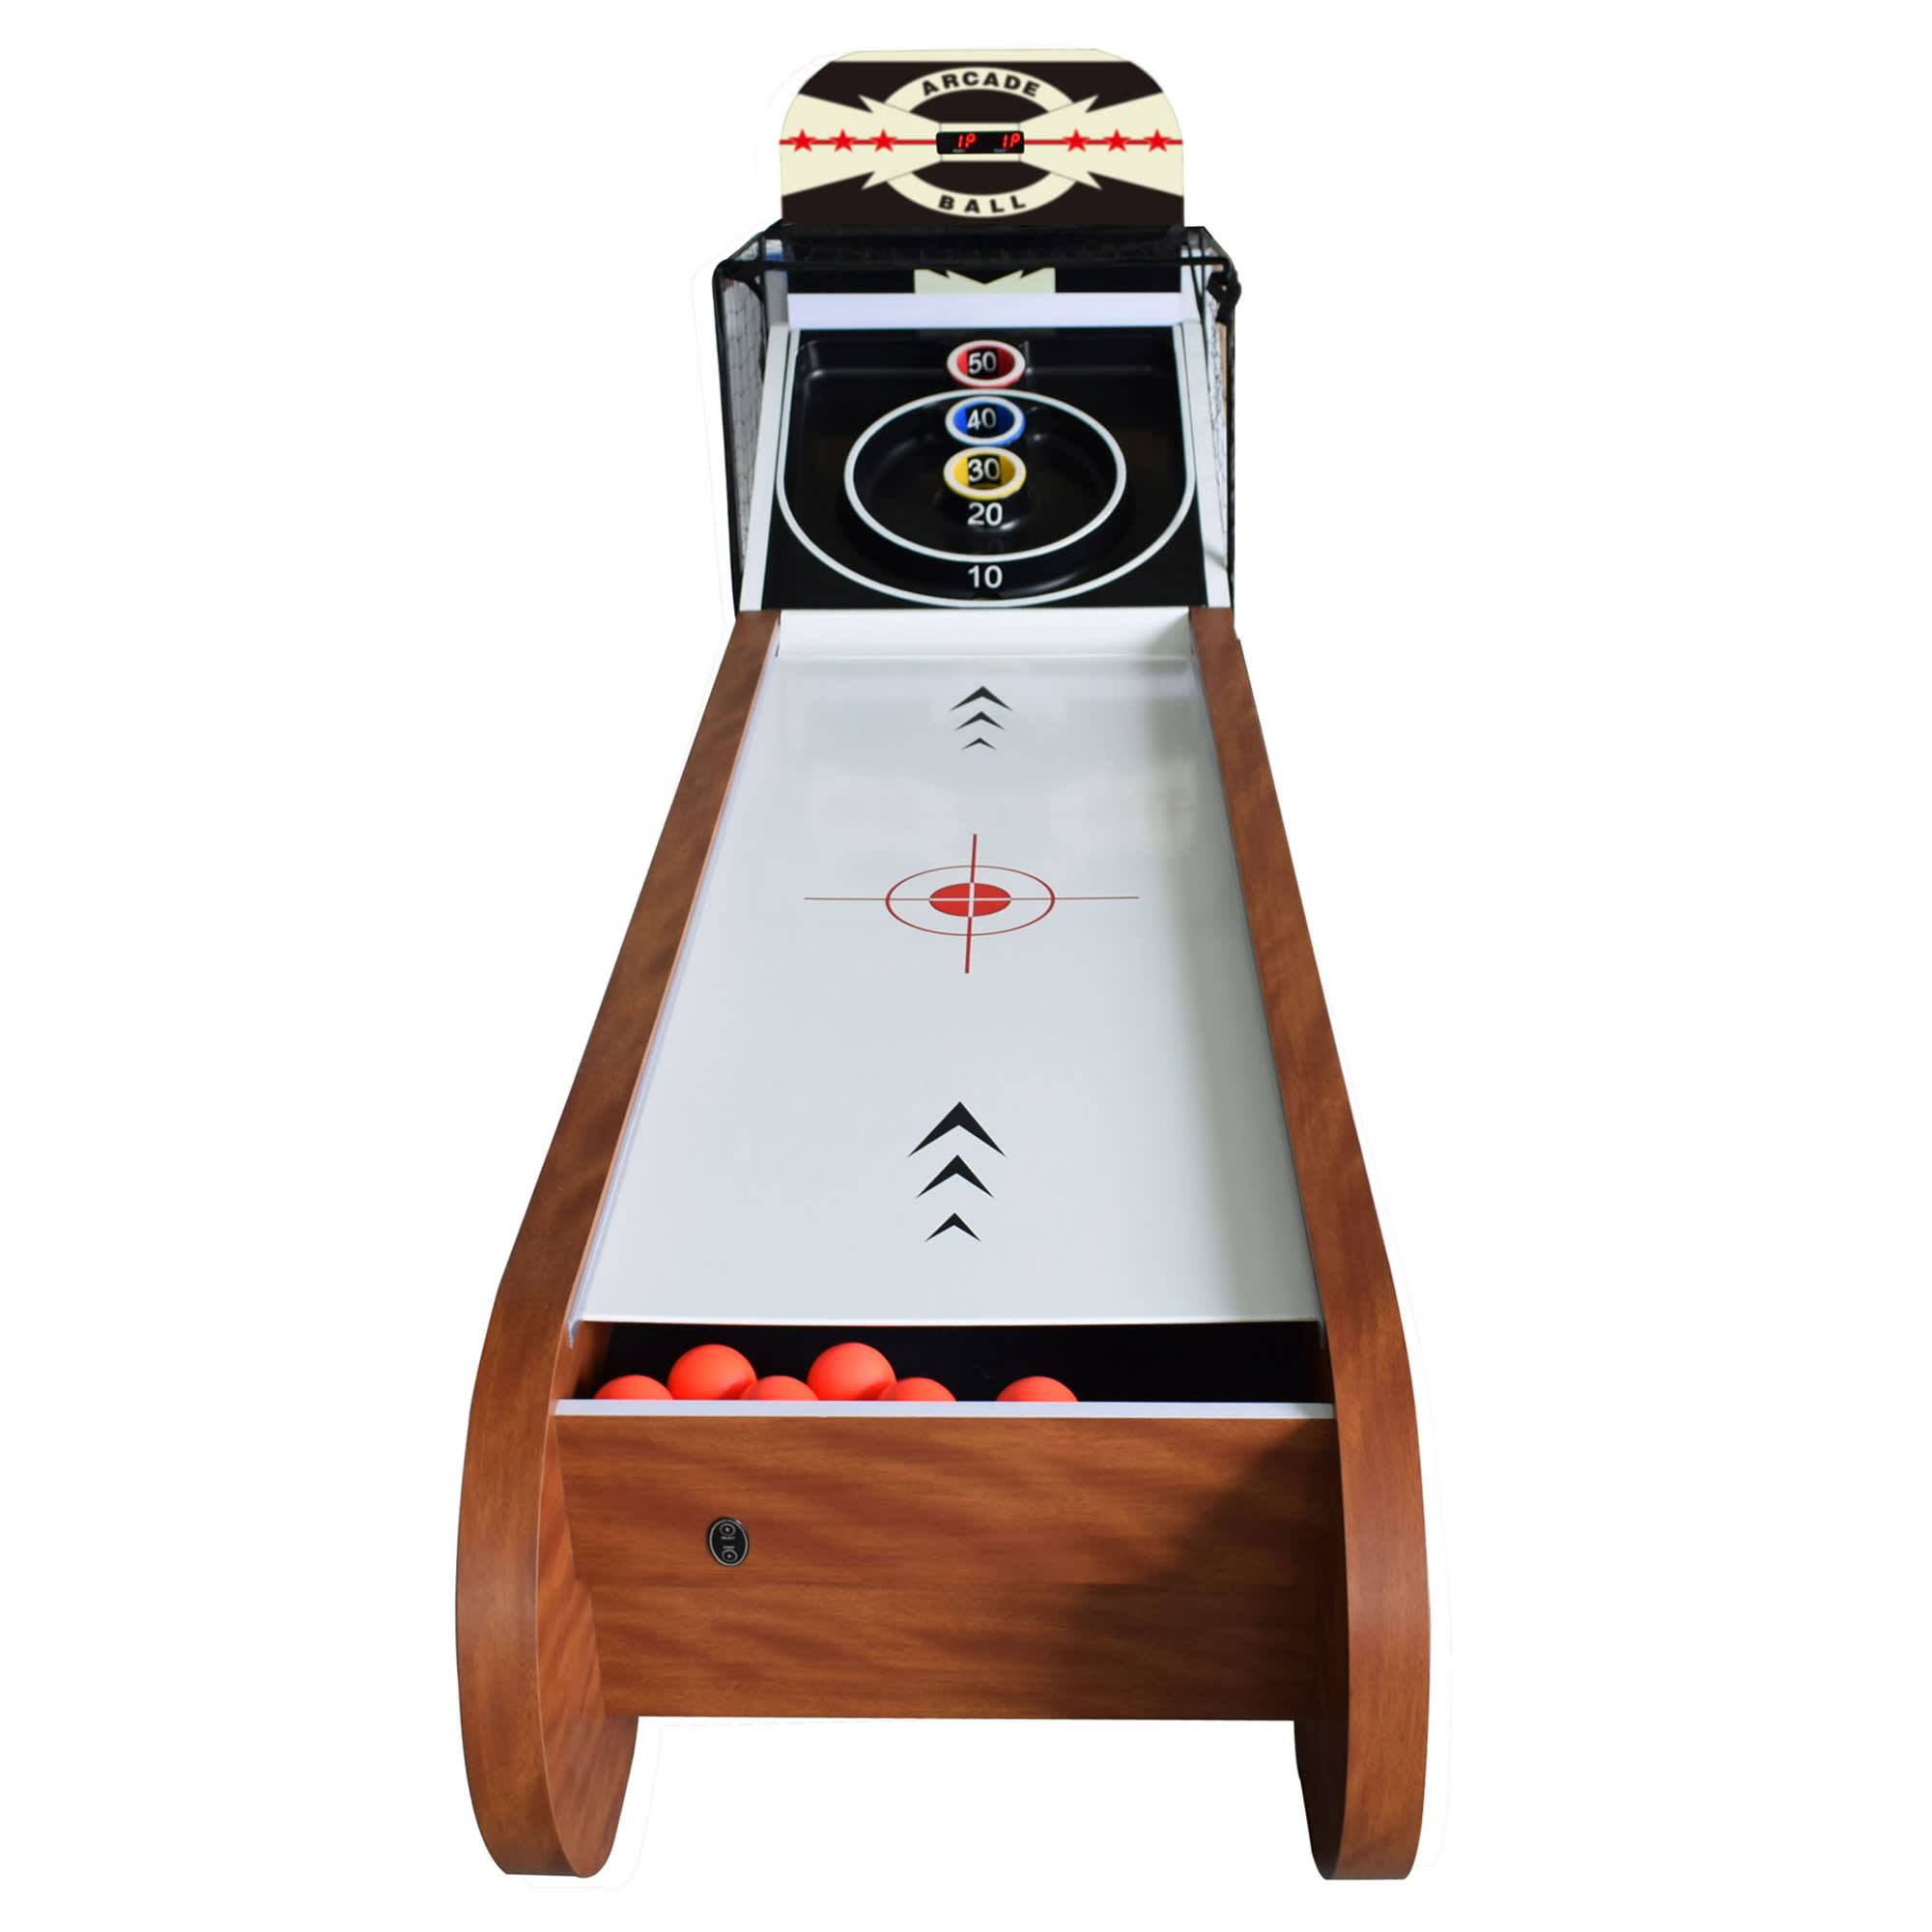 Hathaway Boardwalk 8-ft Roll Hop and Score Arcade Game Table with LED Scoring